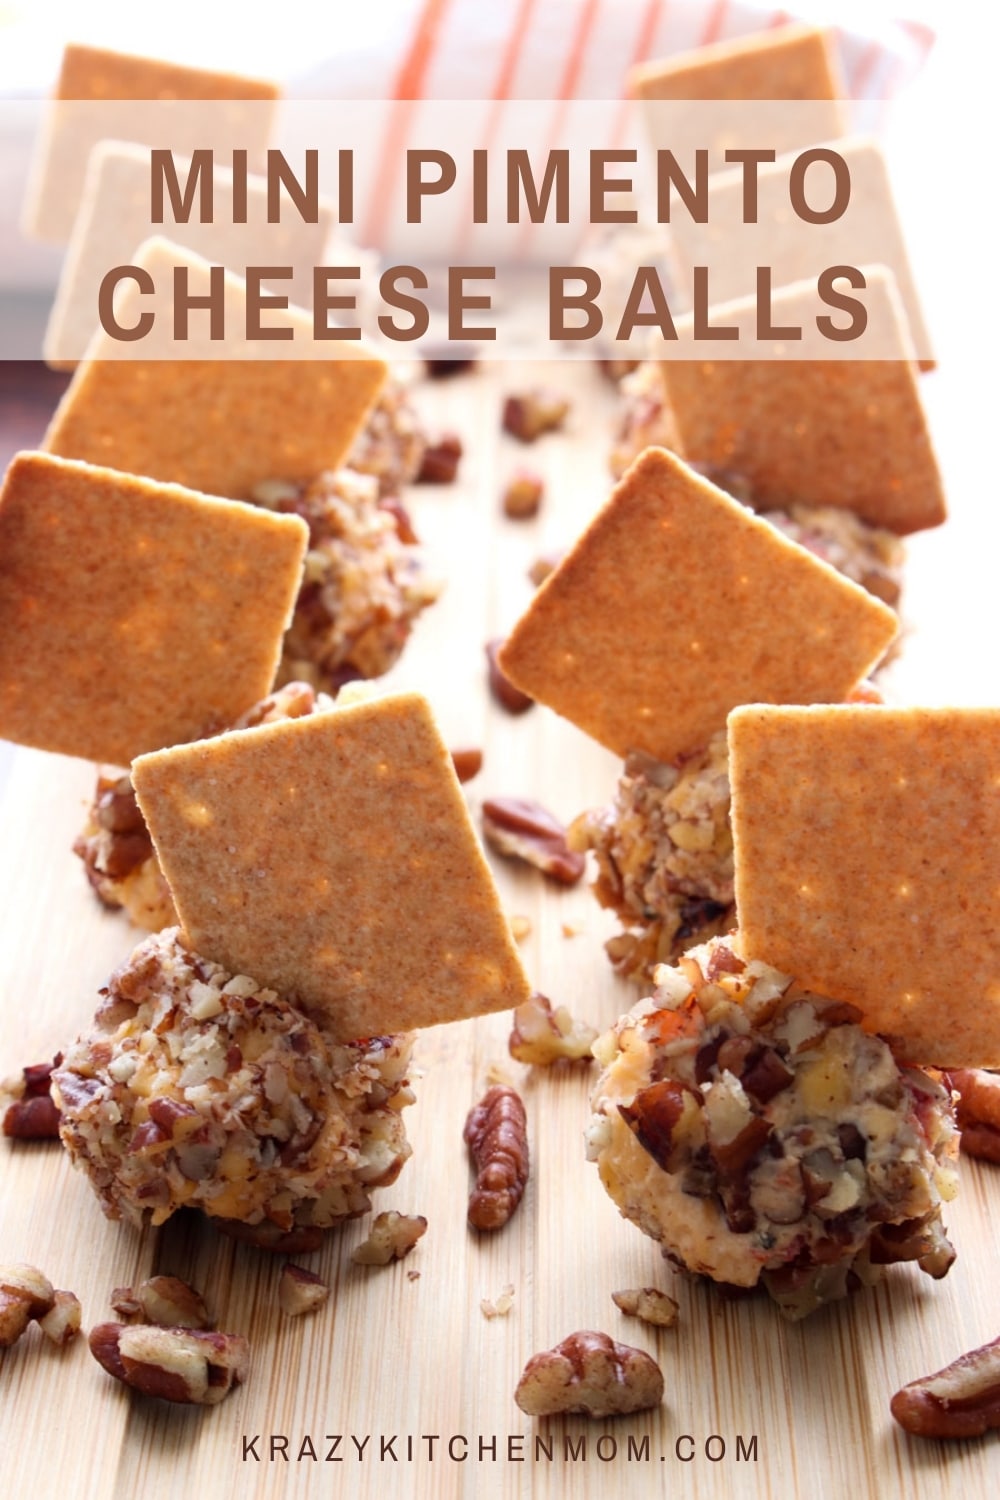 If you like pimento cheese spread, then you are going to LOVE these little bites of pimento cheese rolled in crunchy pecans. Put a taste of the south in your mouth! via @krazykitchenmom